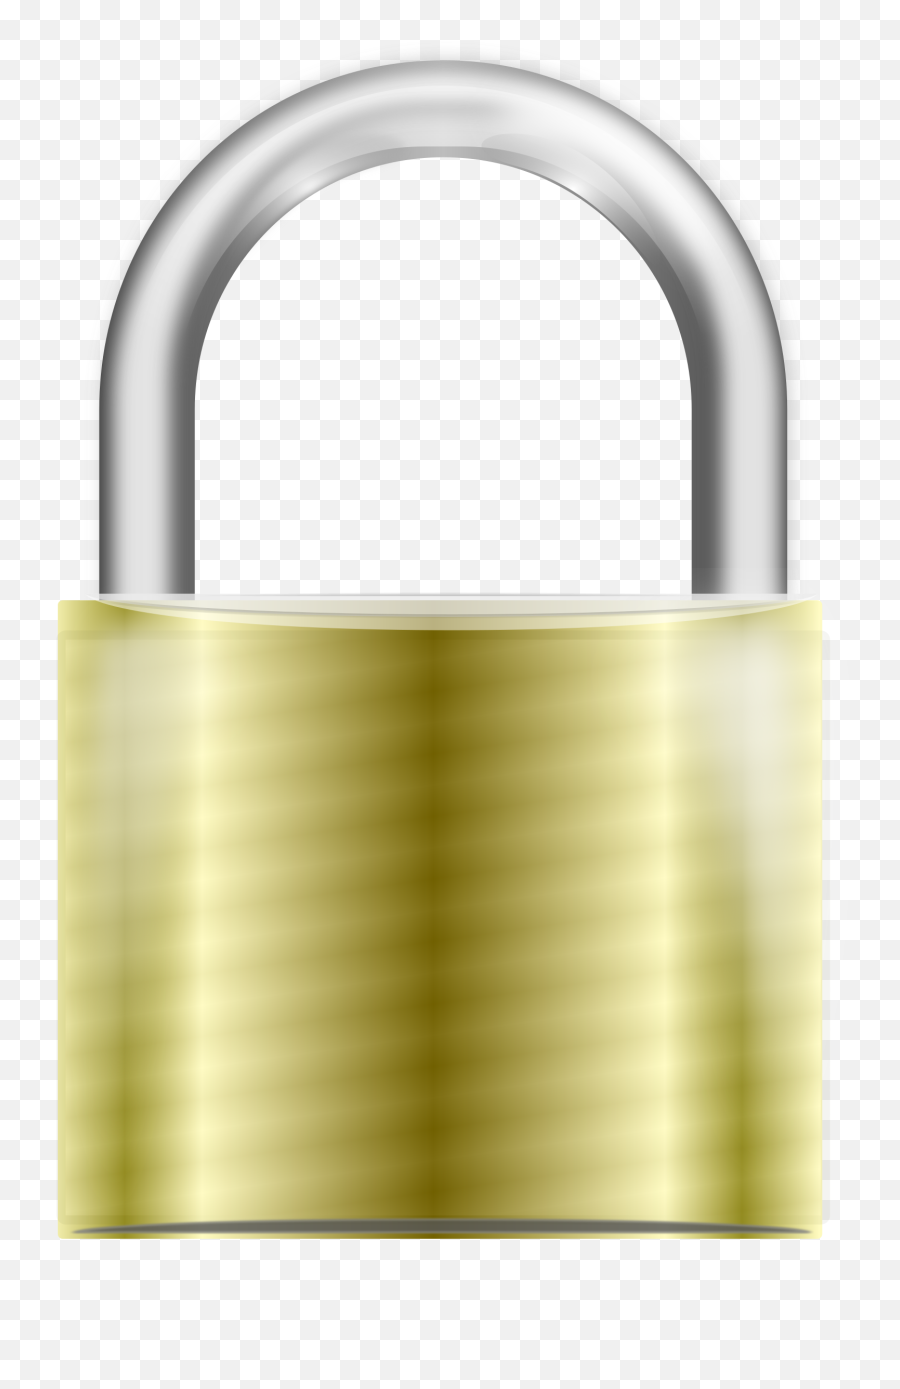 Lock Clipart Transparent - Lock Images Without Background Emoji,Lock Clipart